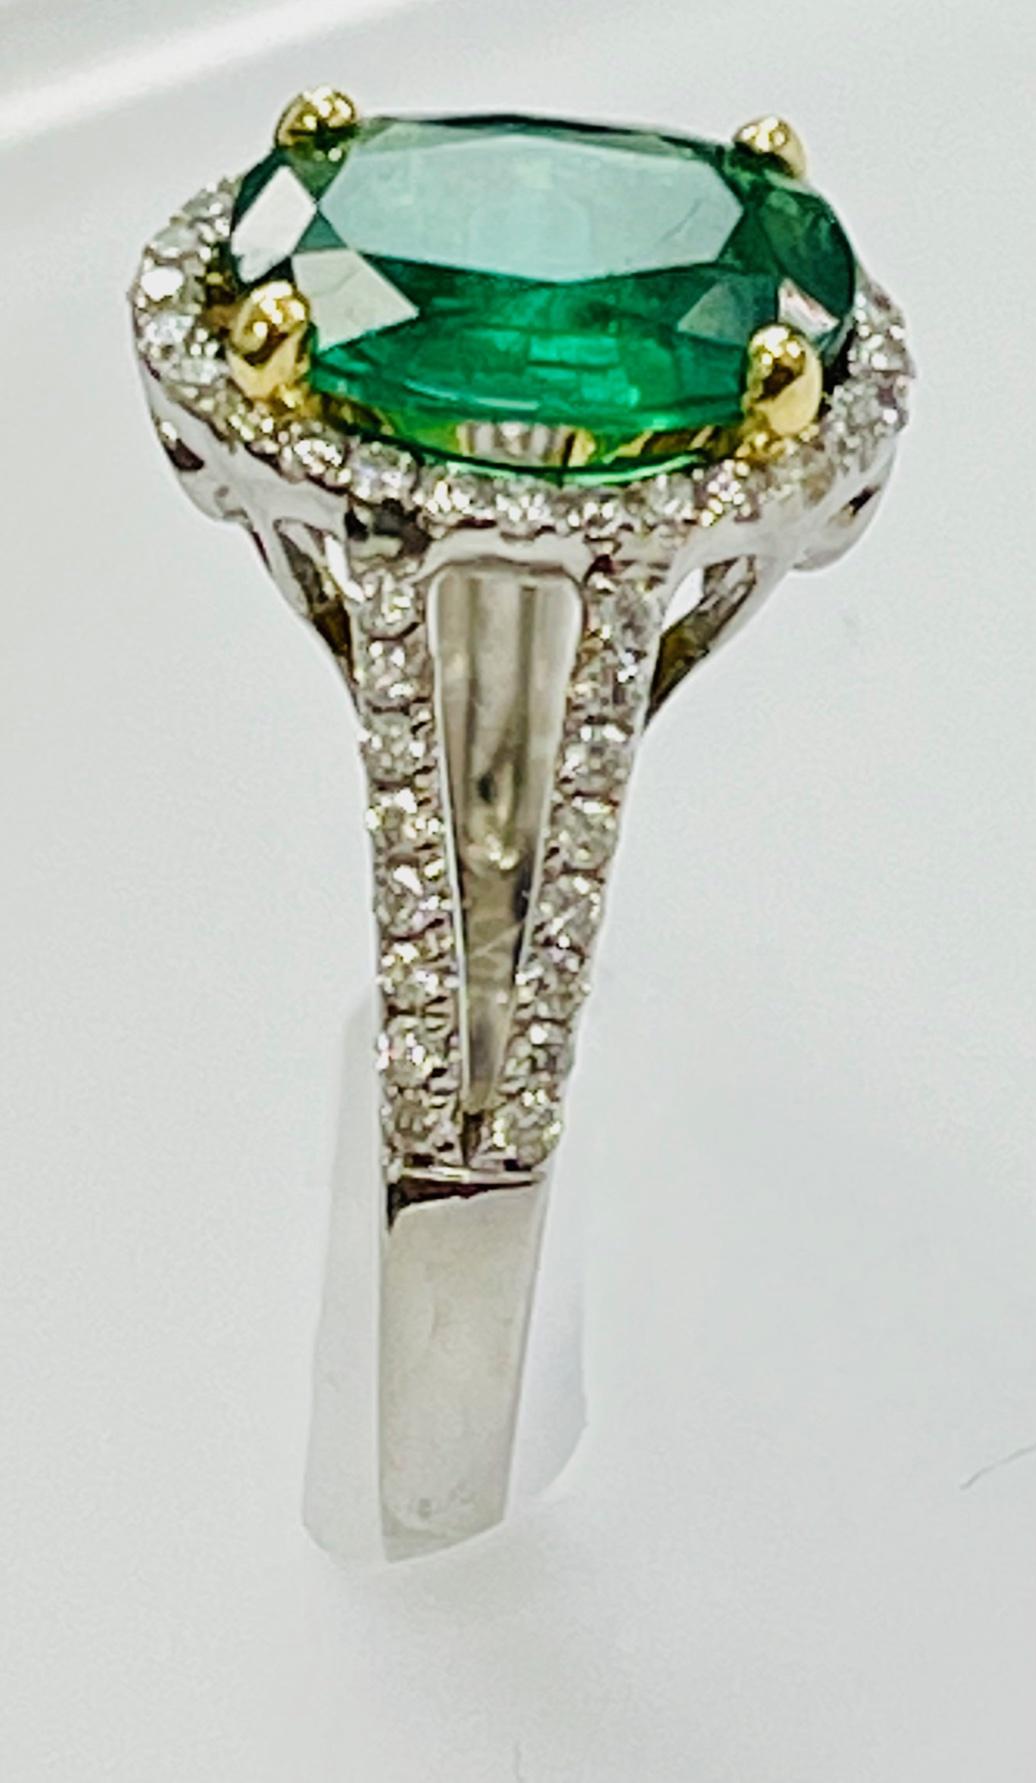 Oval Cut 1.75 Carat Emerald Diamond Cocktail Ring For Sale